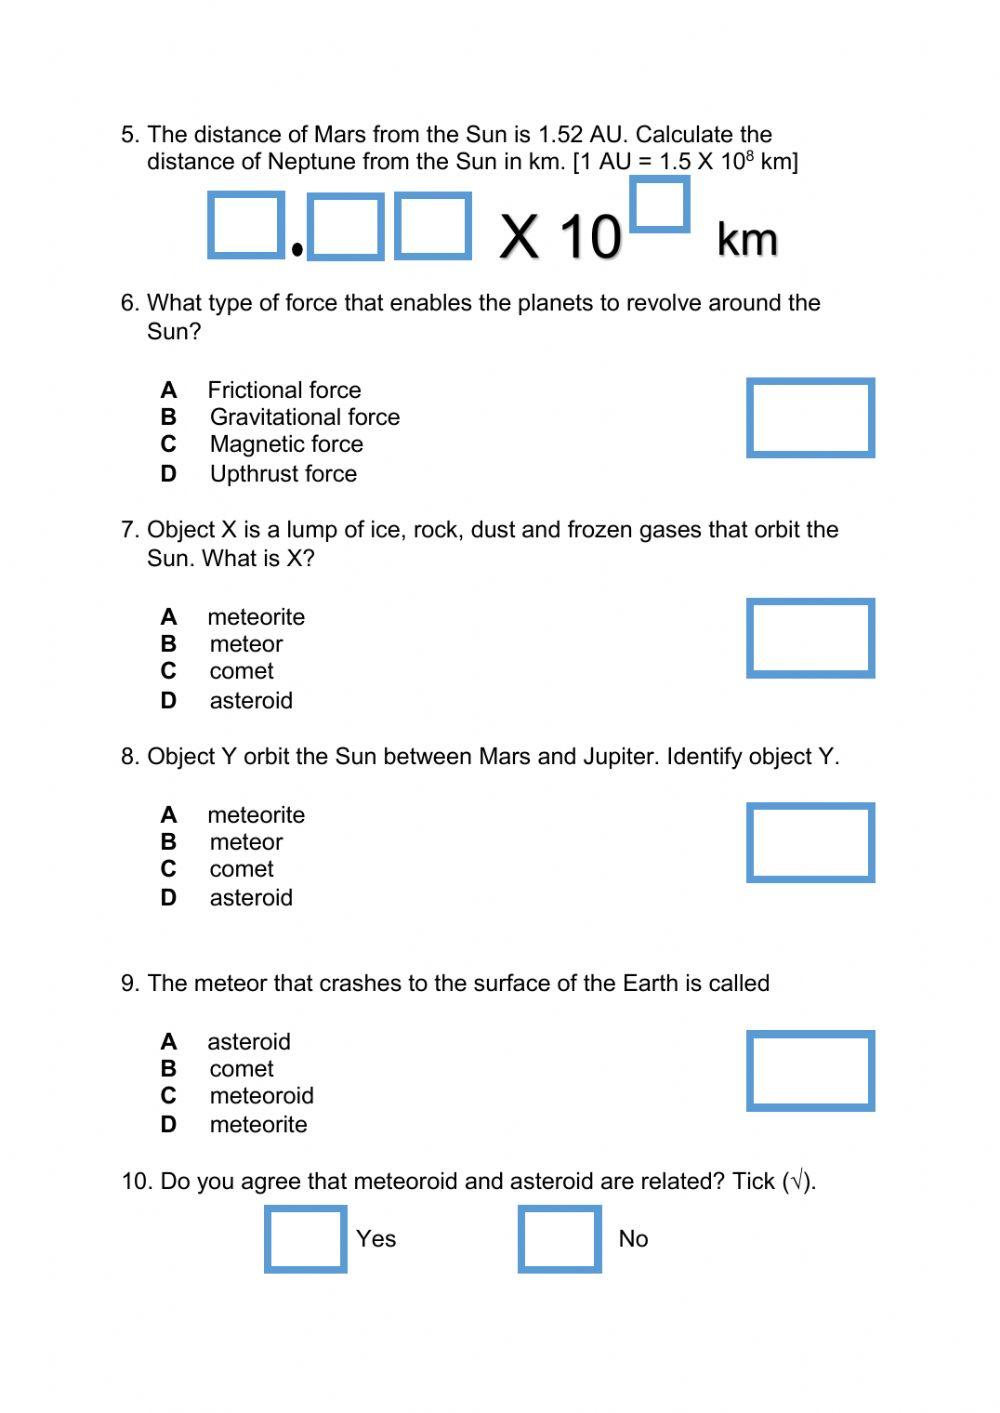 Express Revision Form 2